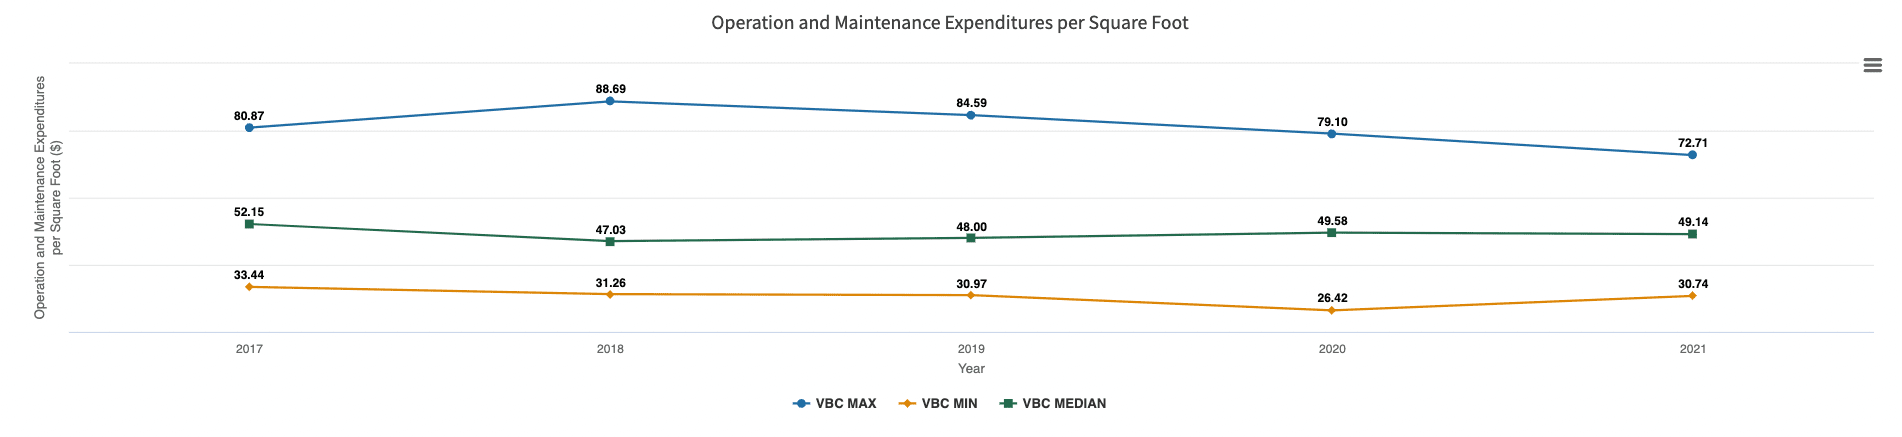 Screenshot of Valley Benchmark Communities' library operation and maintenance expenditures performance measures chart